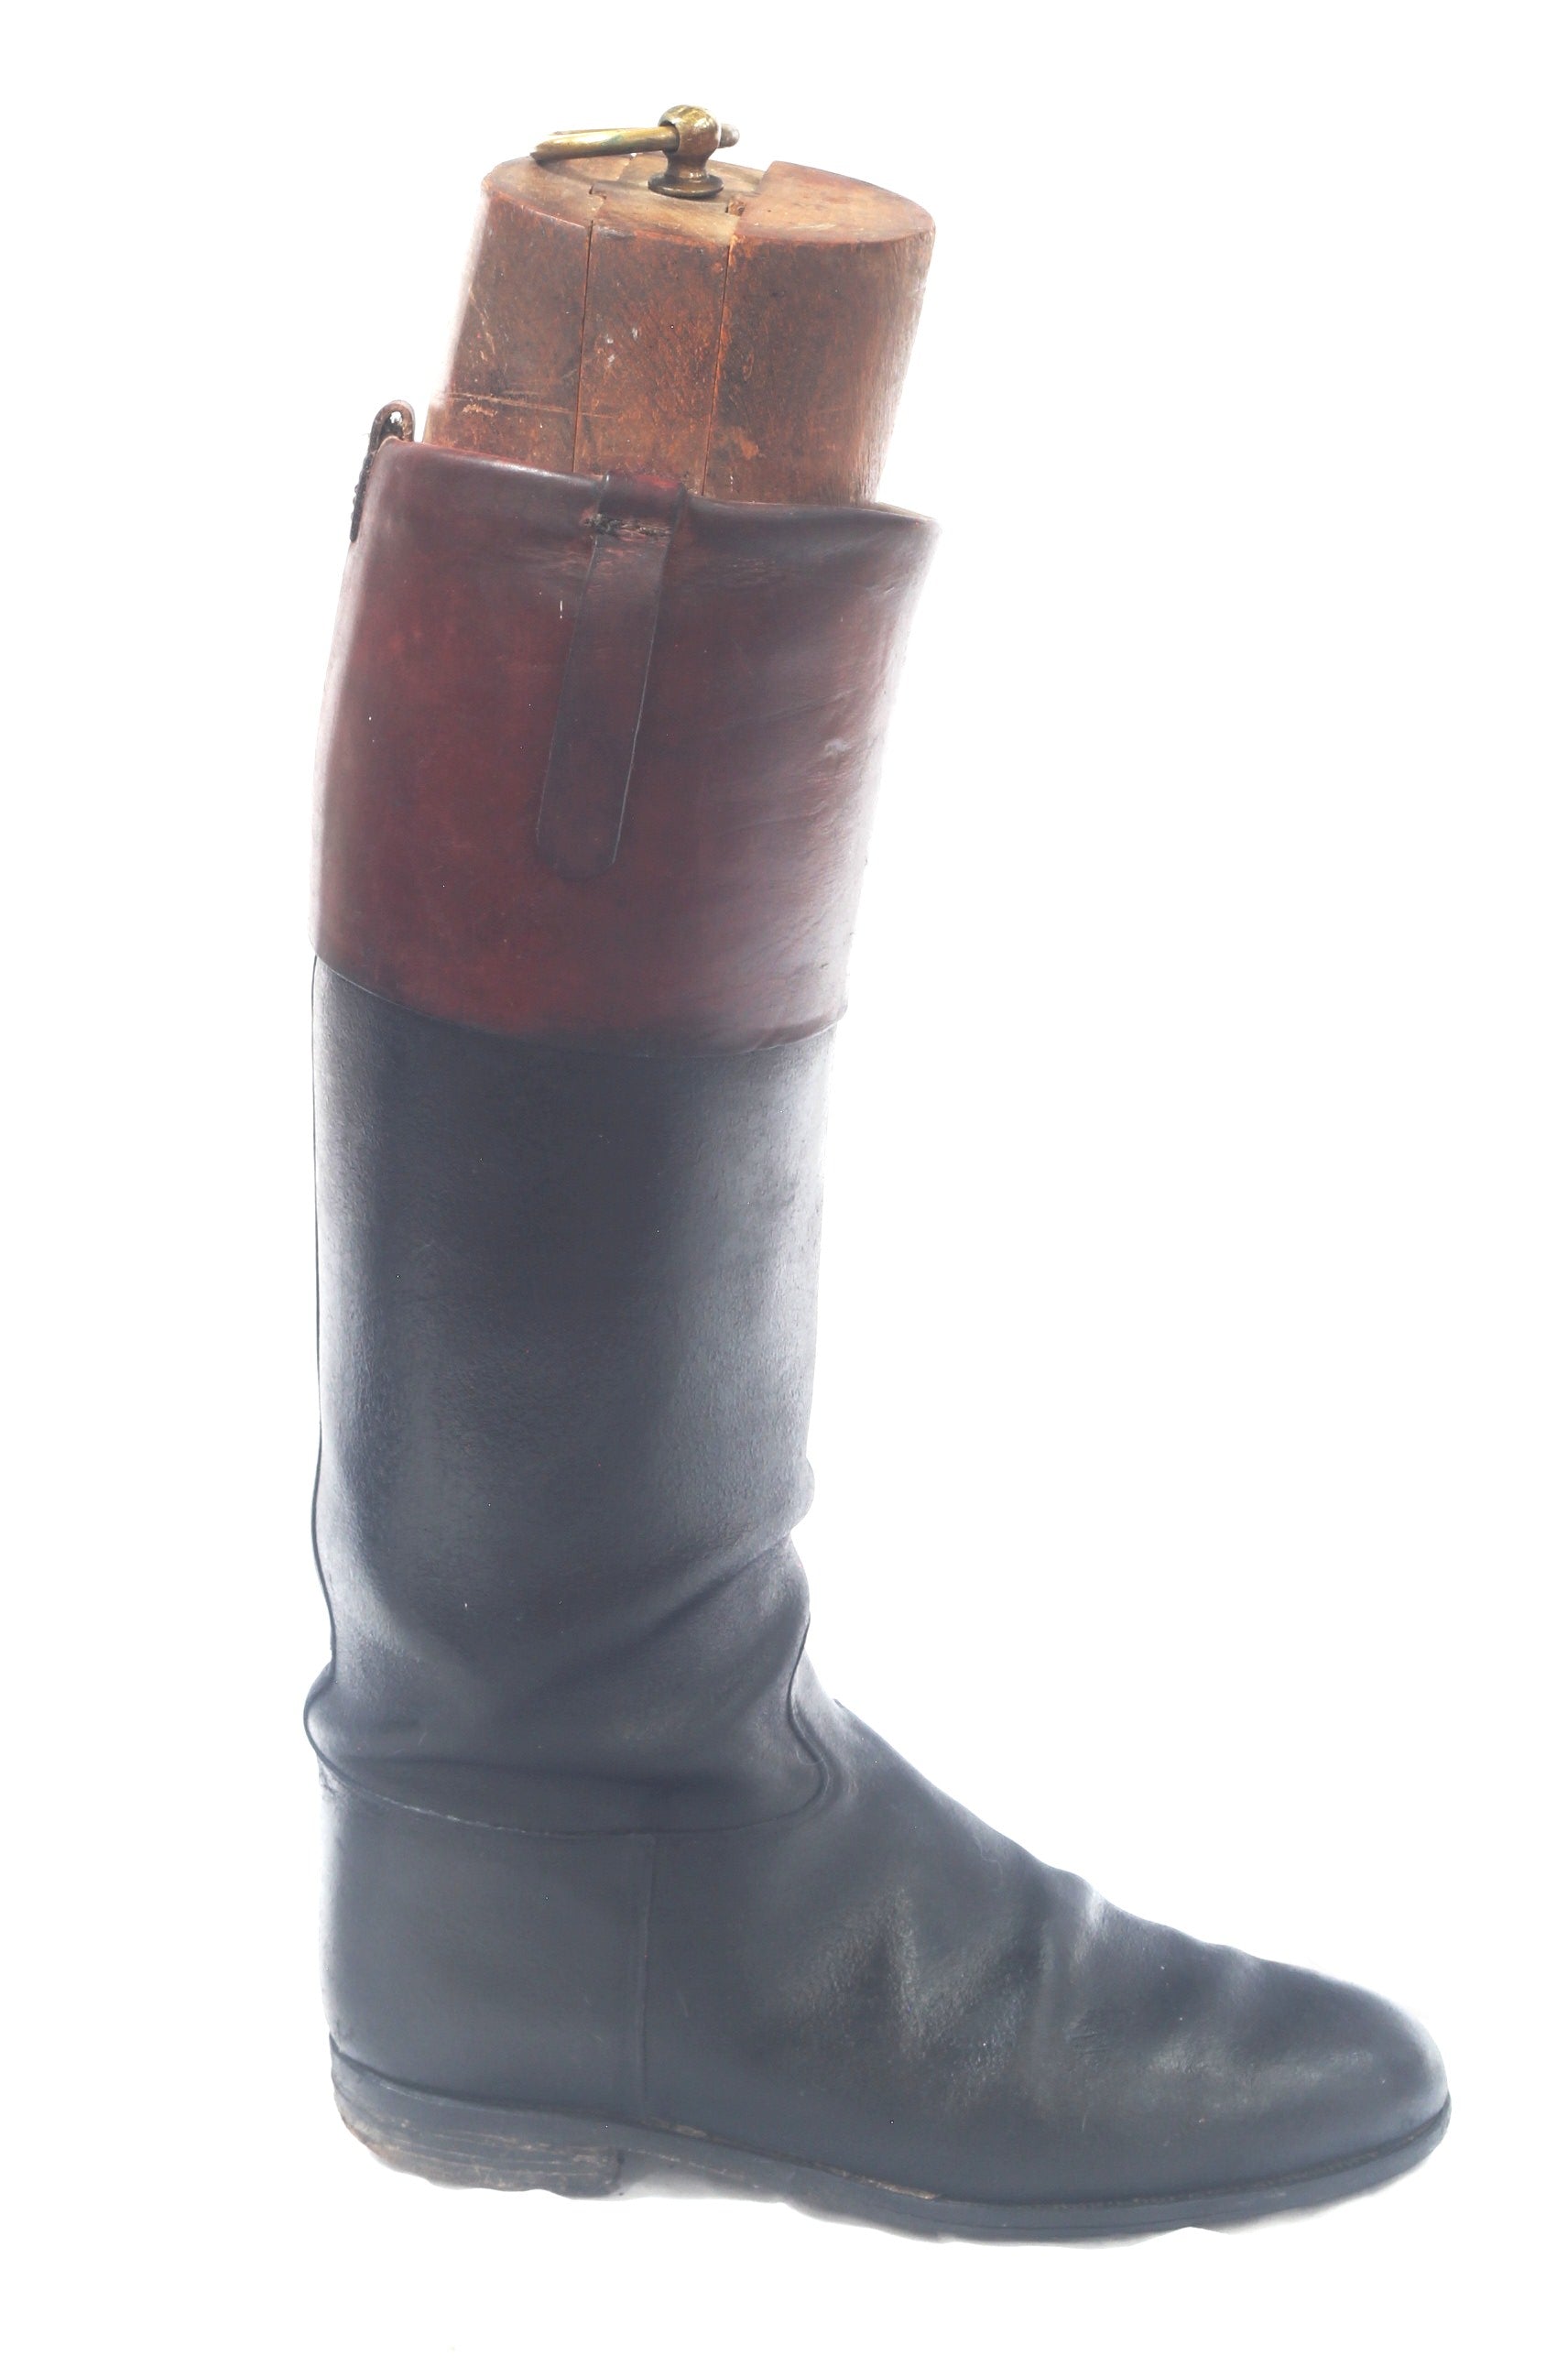 Vintage Leather Hunting Top Boots and Trees